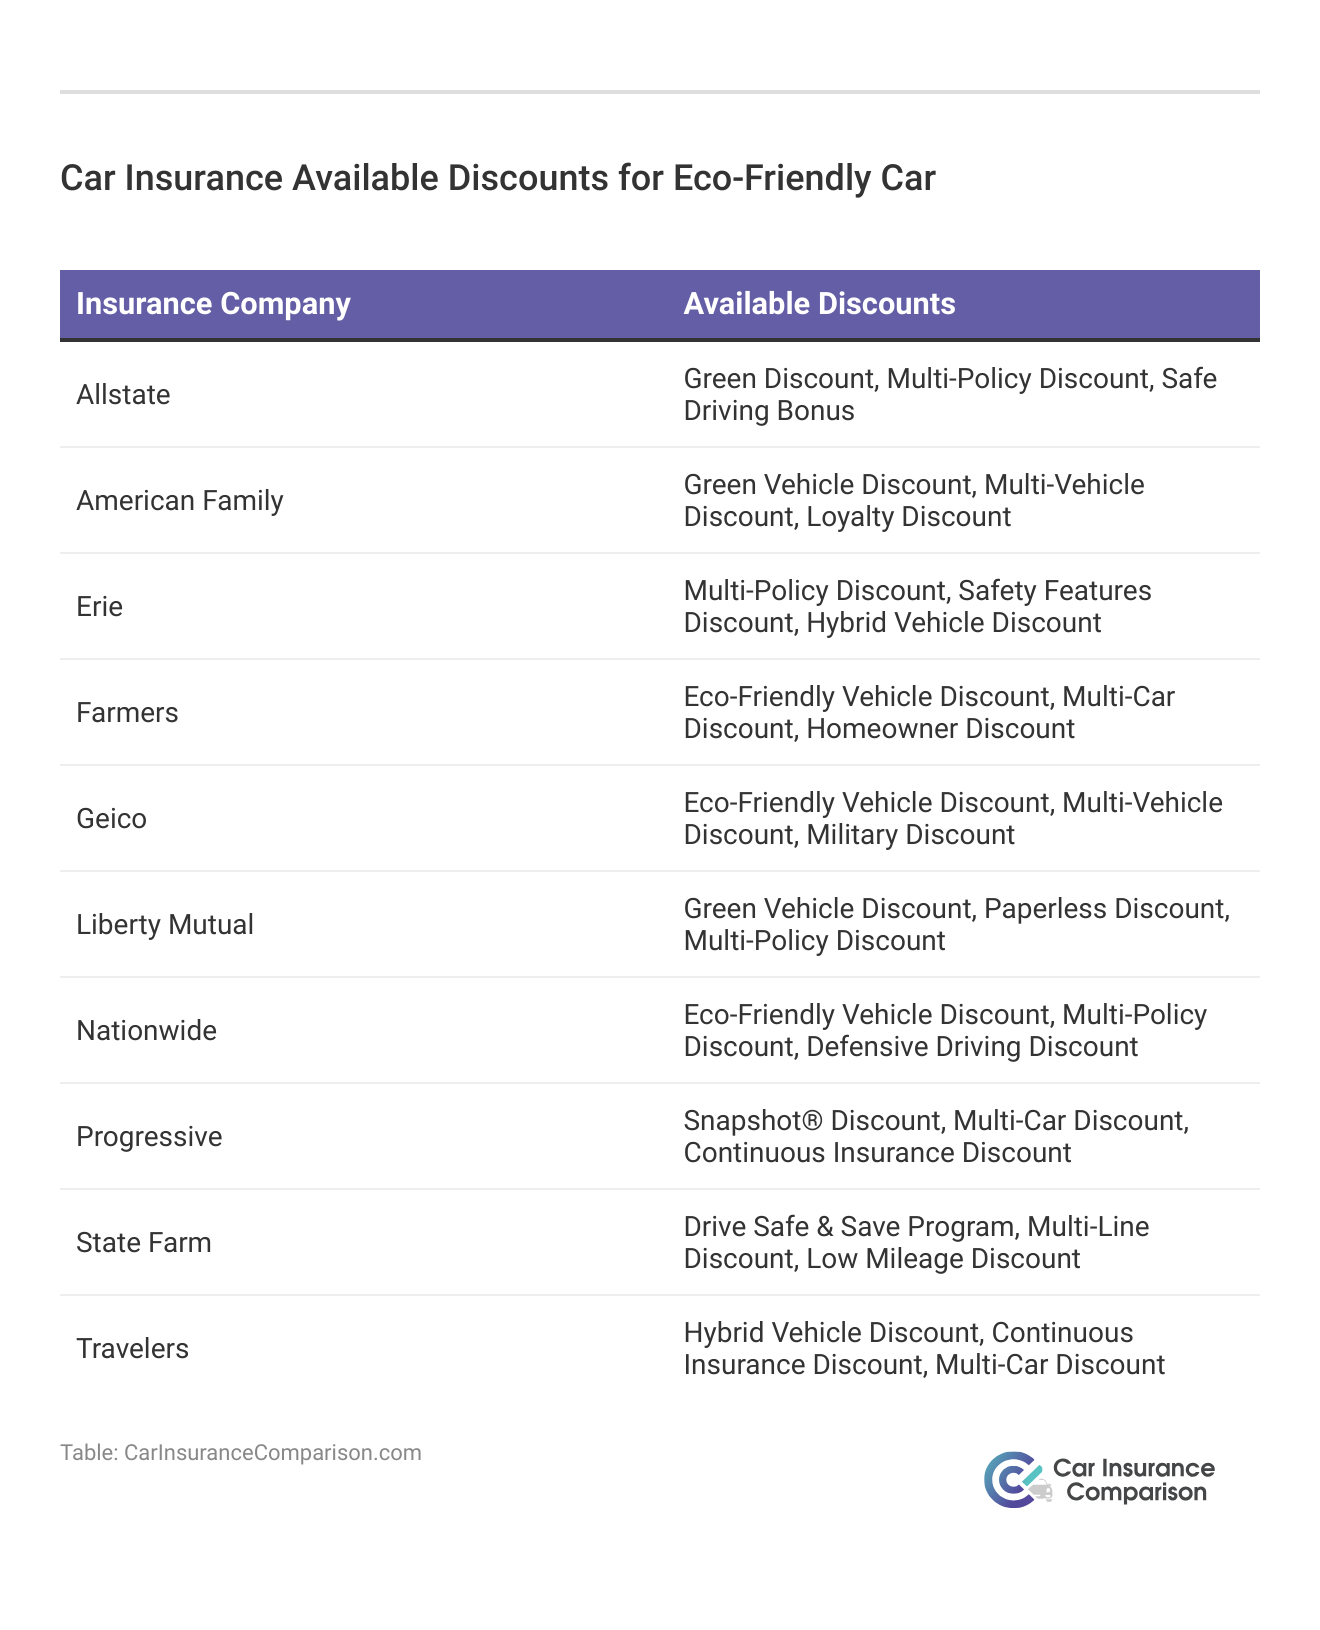 <h3>Car Insurance Available Discounts for Eco-Friendly Car</h3>